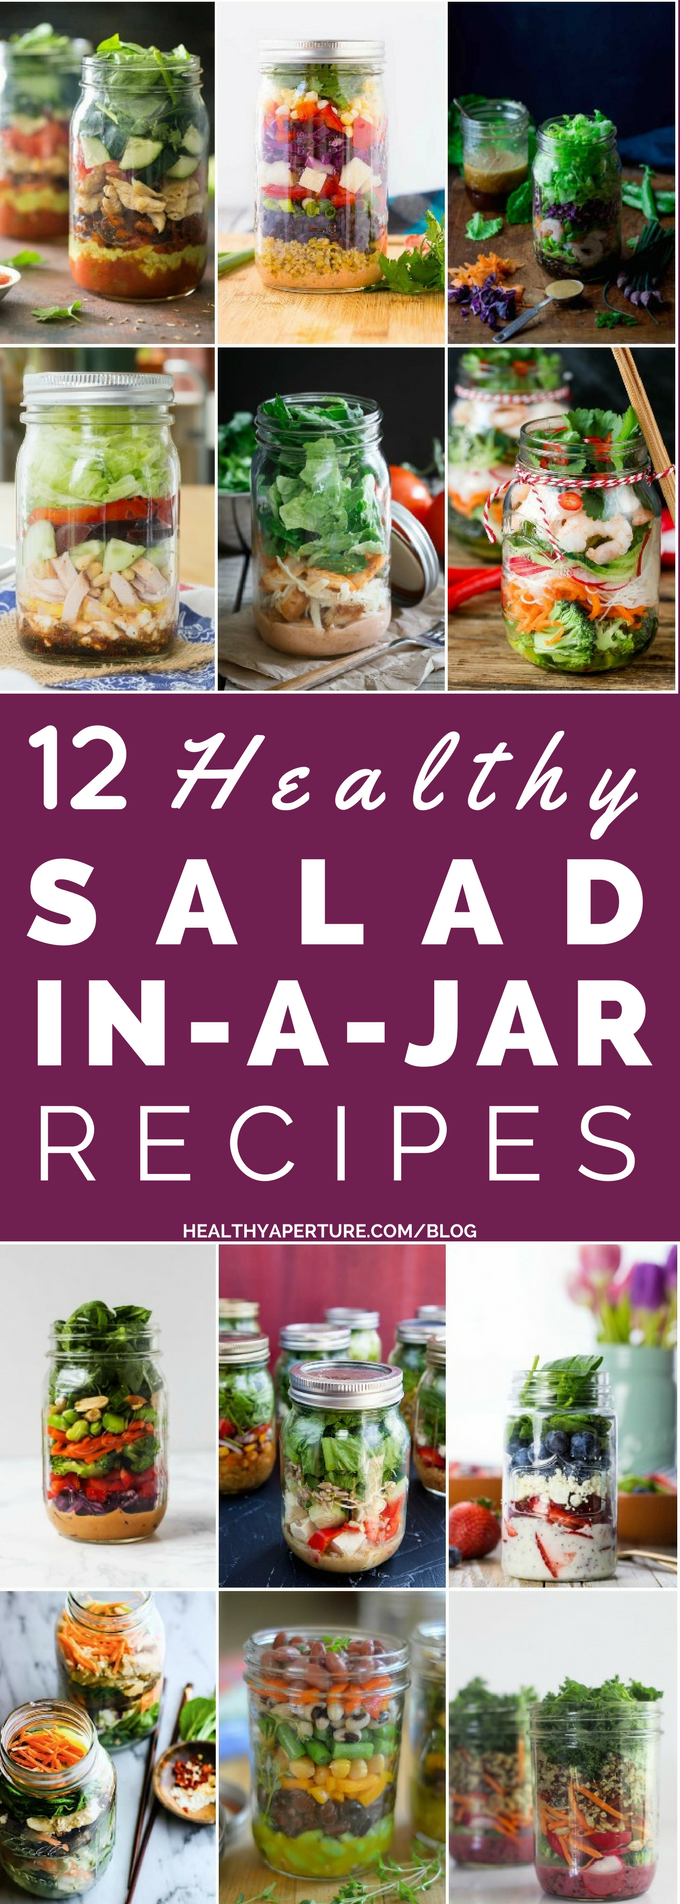 Search Results | Healthy Aperture -   18 healthy recipes On The Go clean eating ideas